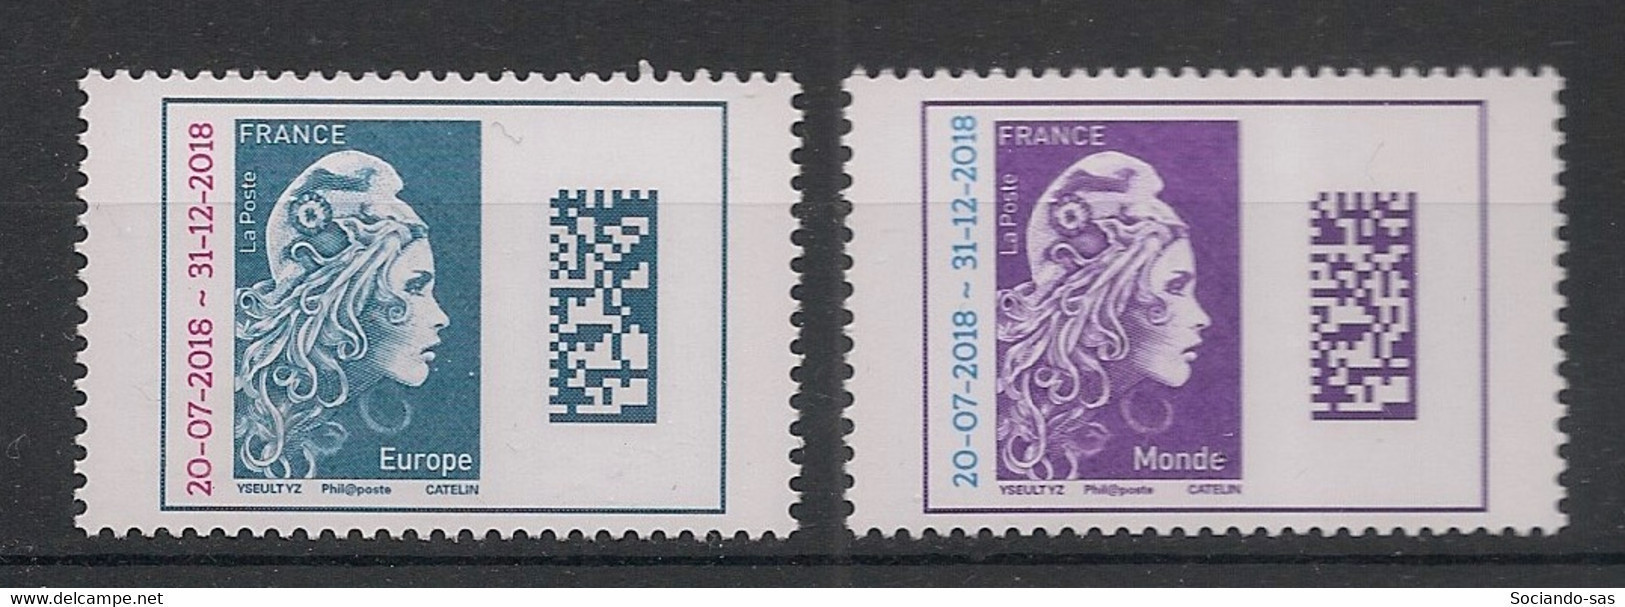 FRANCE - 2018 - N°YT. 5270 à 5271 - Marianne D'YZ Surchargée - Neuf Luxe ** / MNH / Postfrisch - Unused Stamps